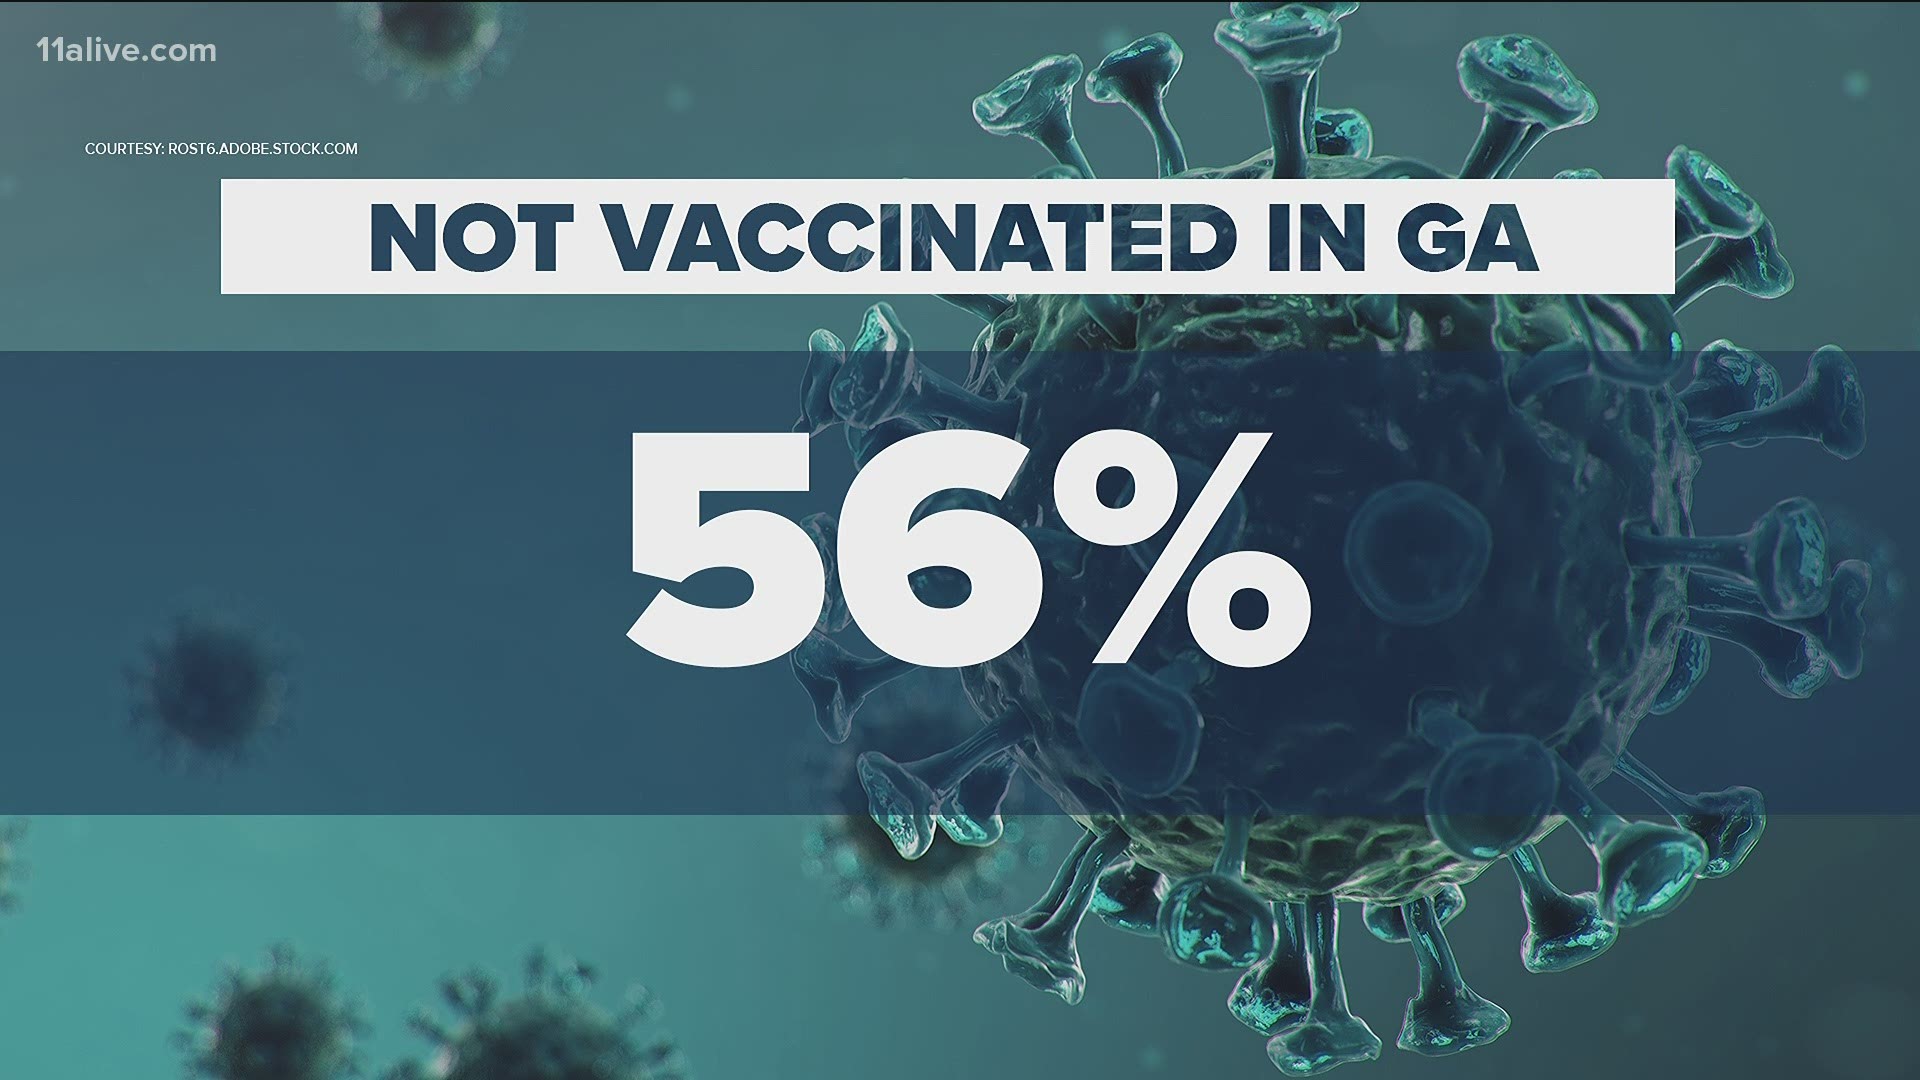 The age group with the lowest vaccination rate is kids 12-15.